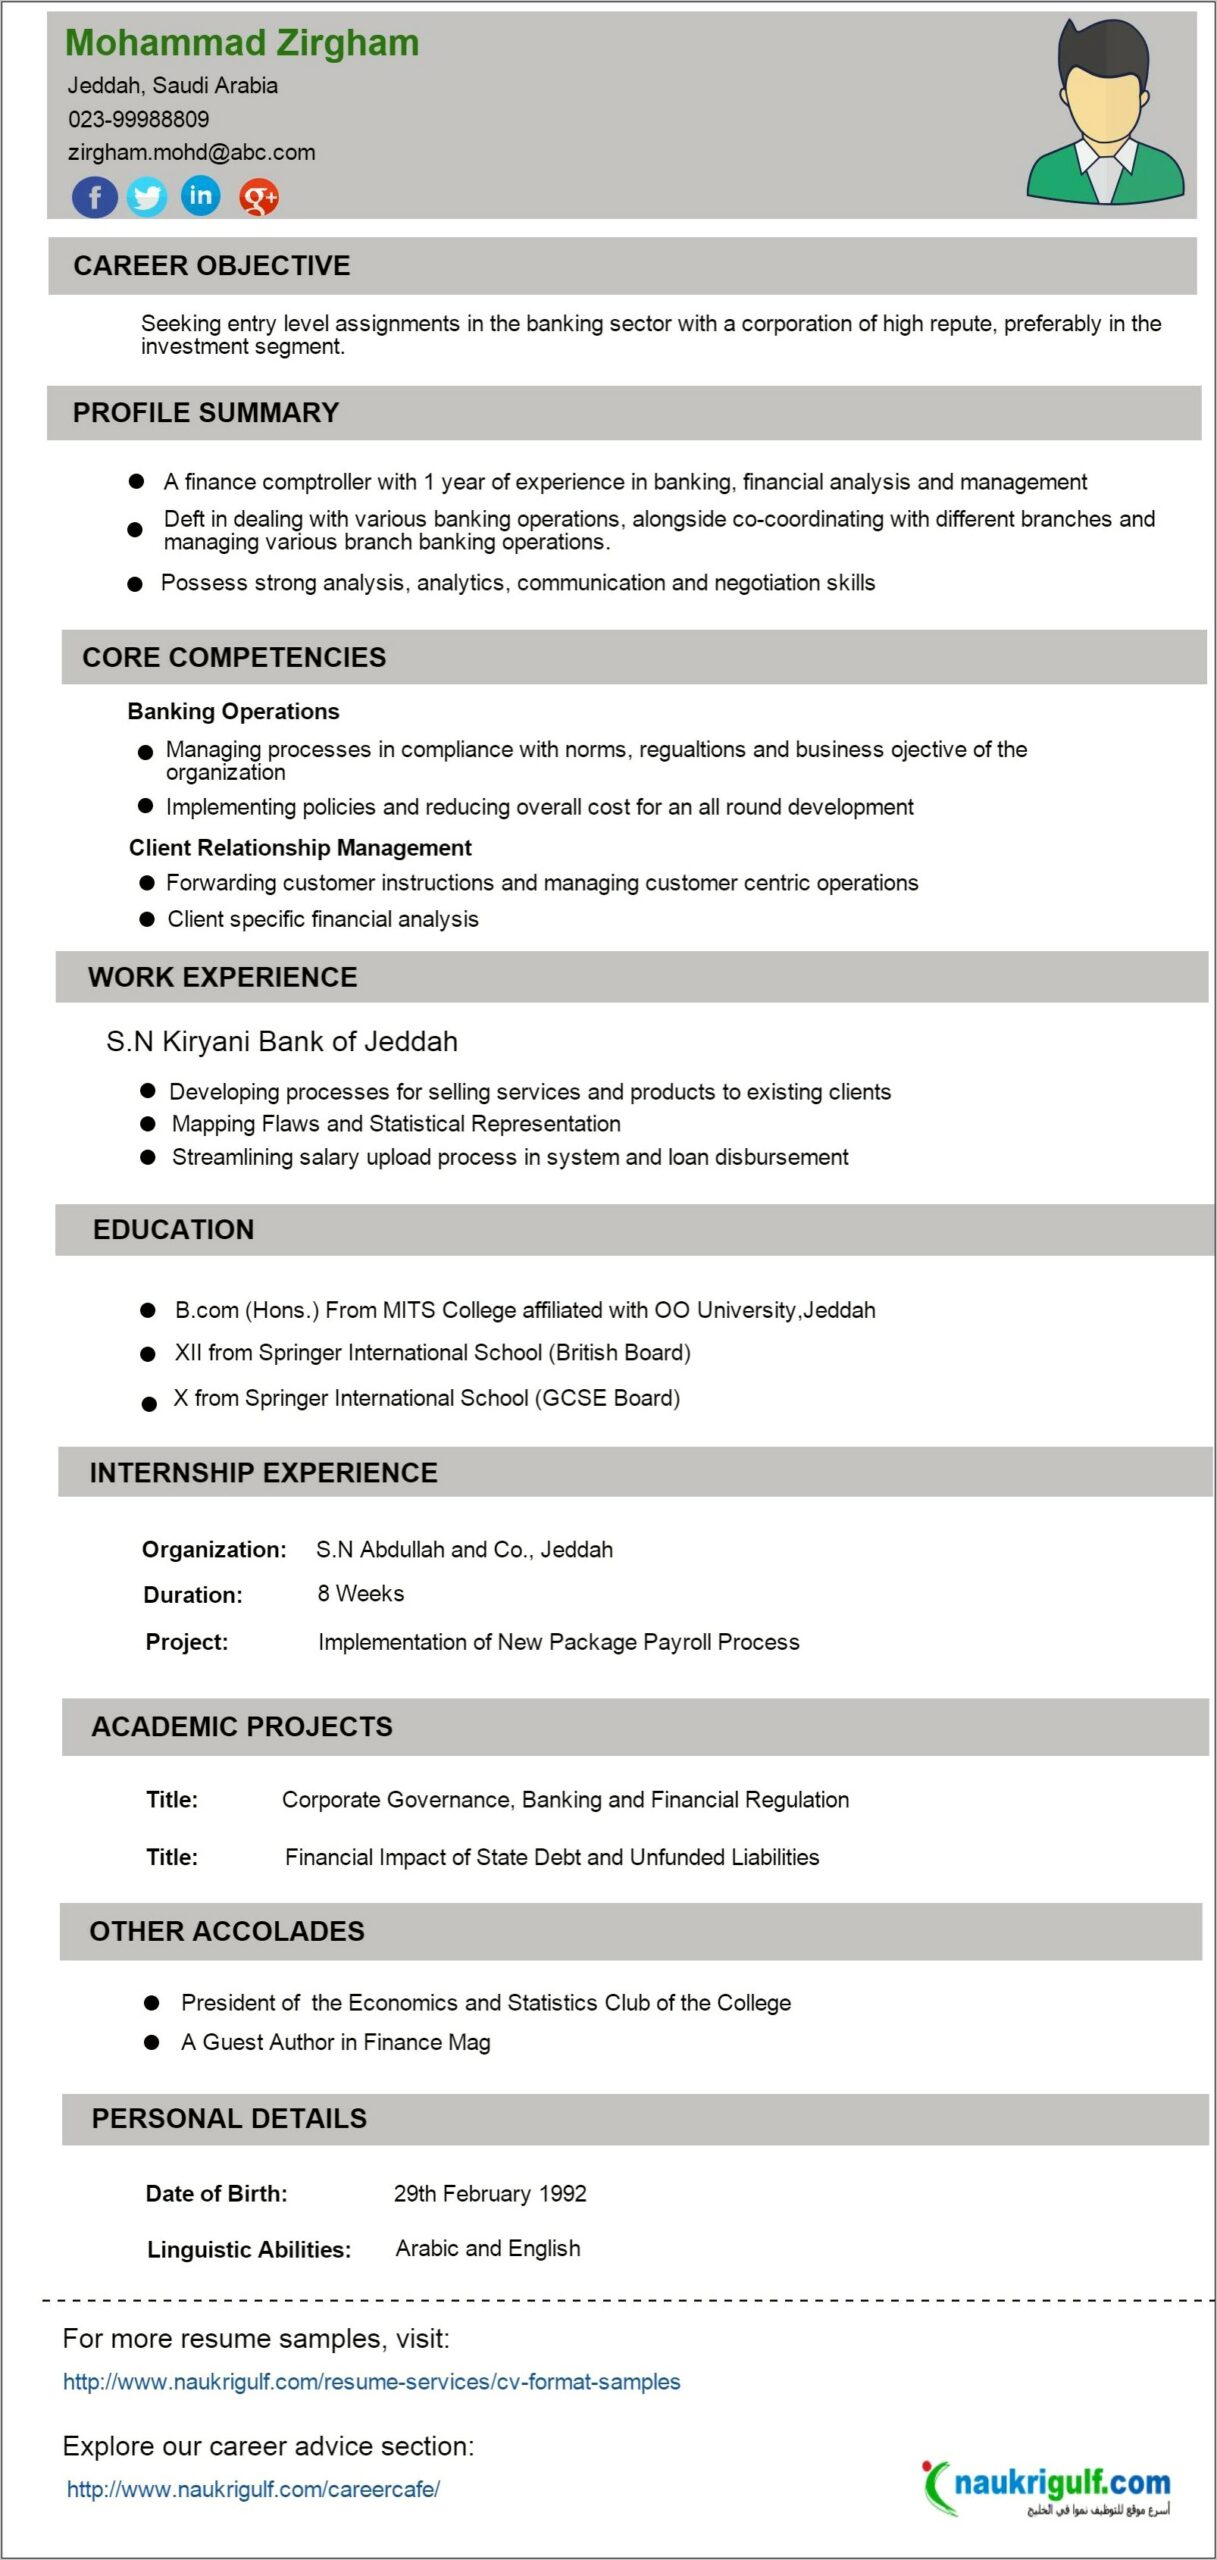 Best Resume Objective Statement For Banking Relatiohsip Manager